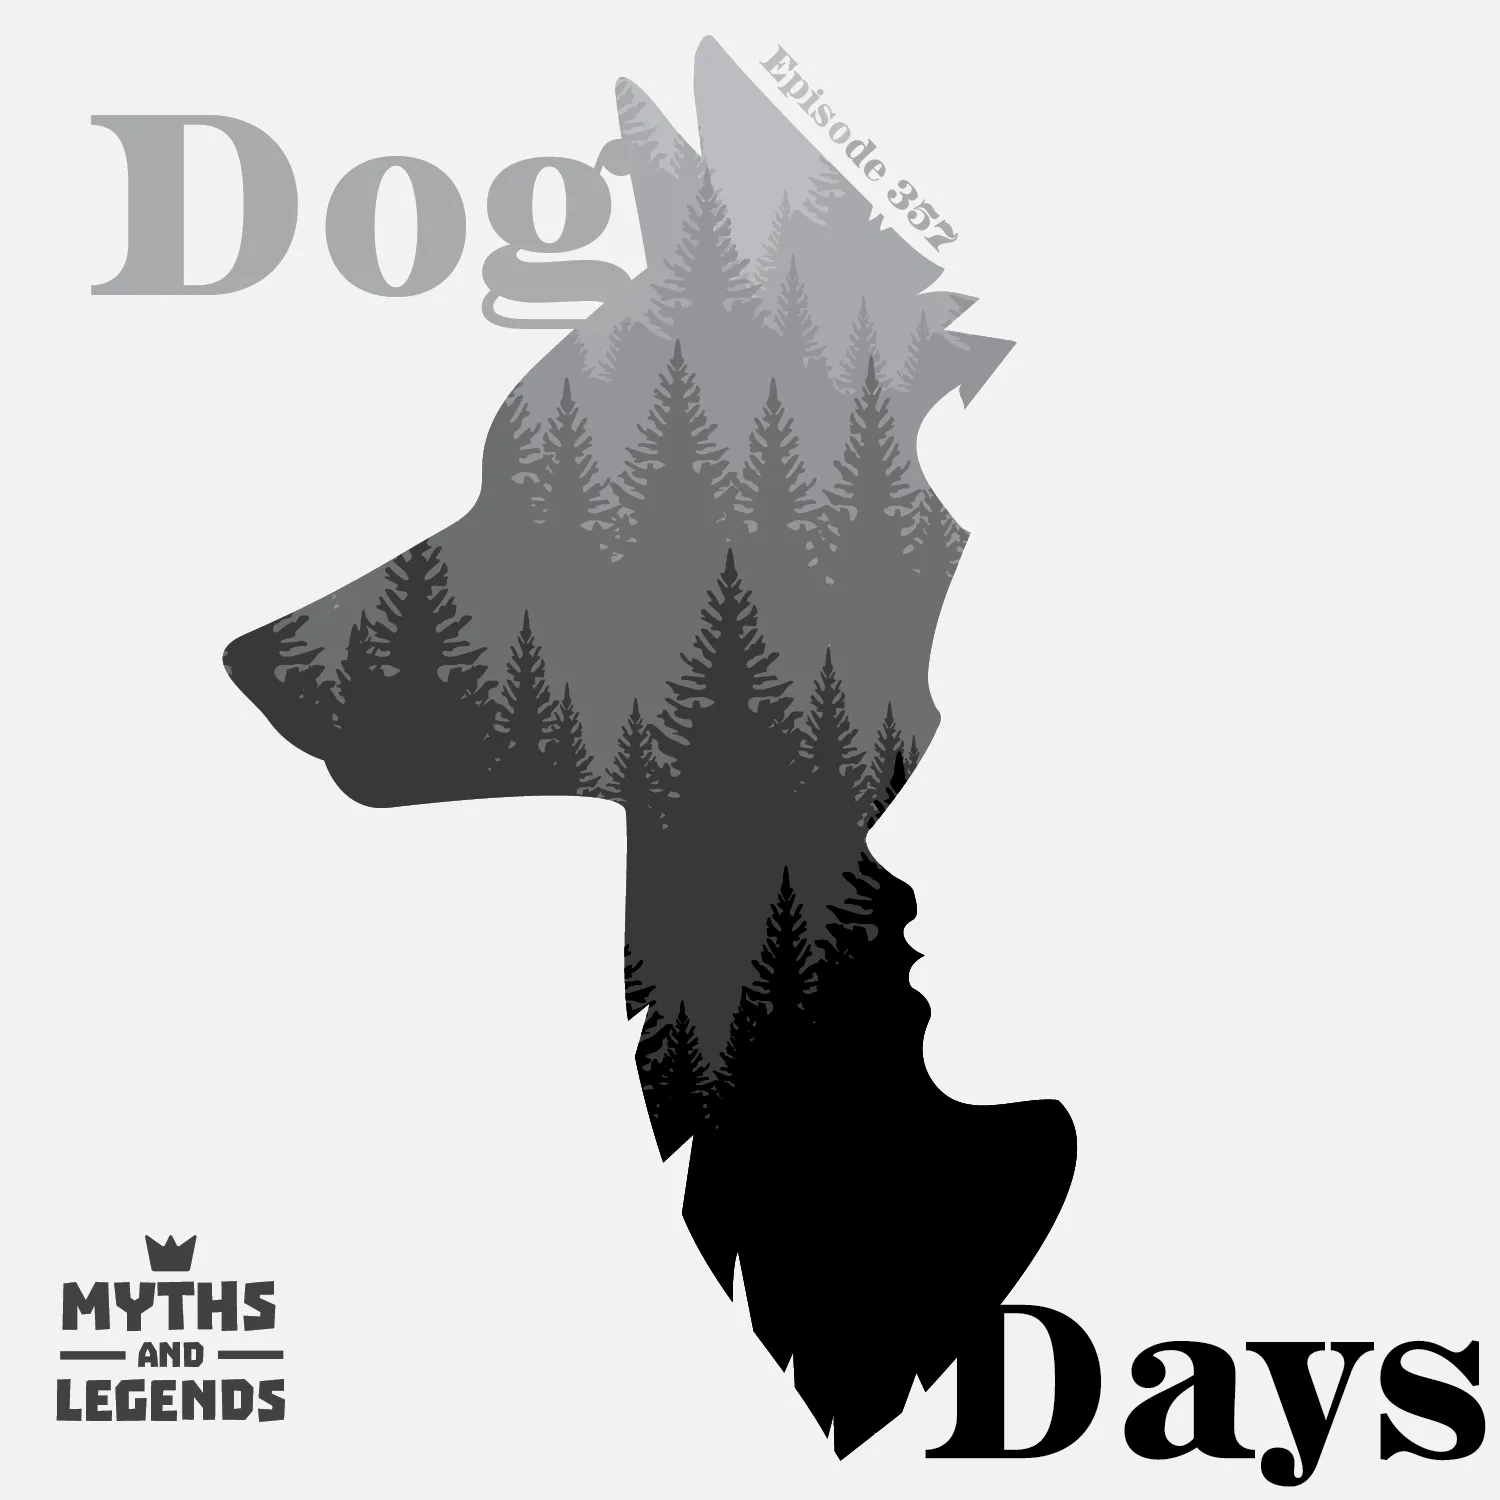 This image features a silhouette design that merges the profiles of a dog and a human face on the right, set against a faded forest background contained within the dog's head. At the top right, the text 'Episode 357' is overlaid. The words 'Dog' and 'Days' are prominently displayed in large, bold letters on the top left and bottom right respectively.